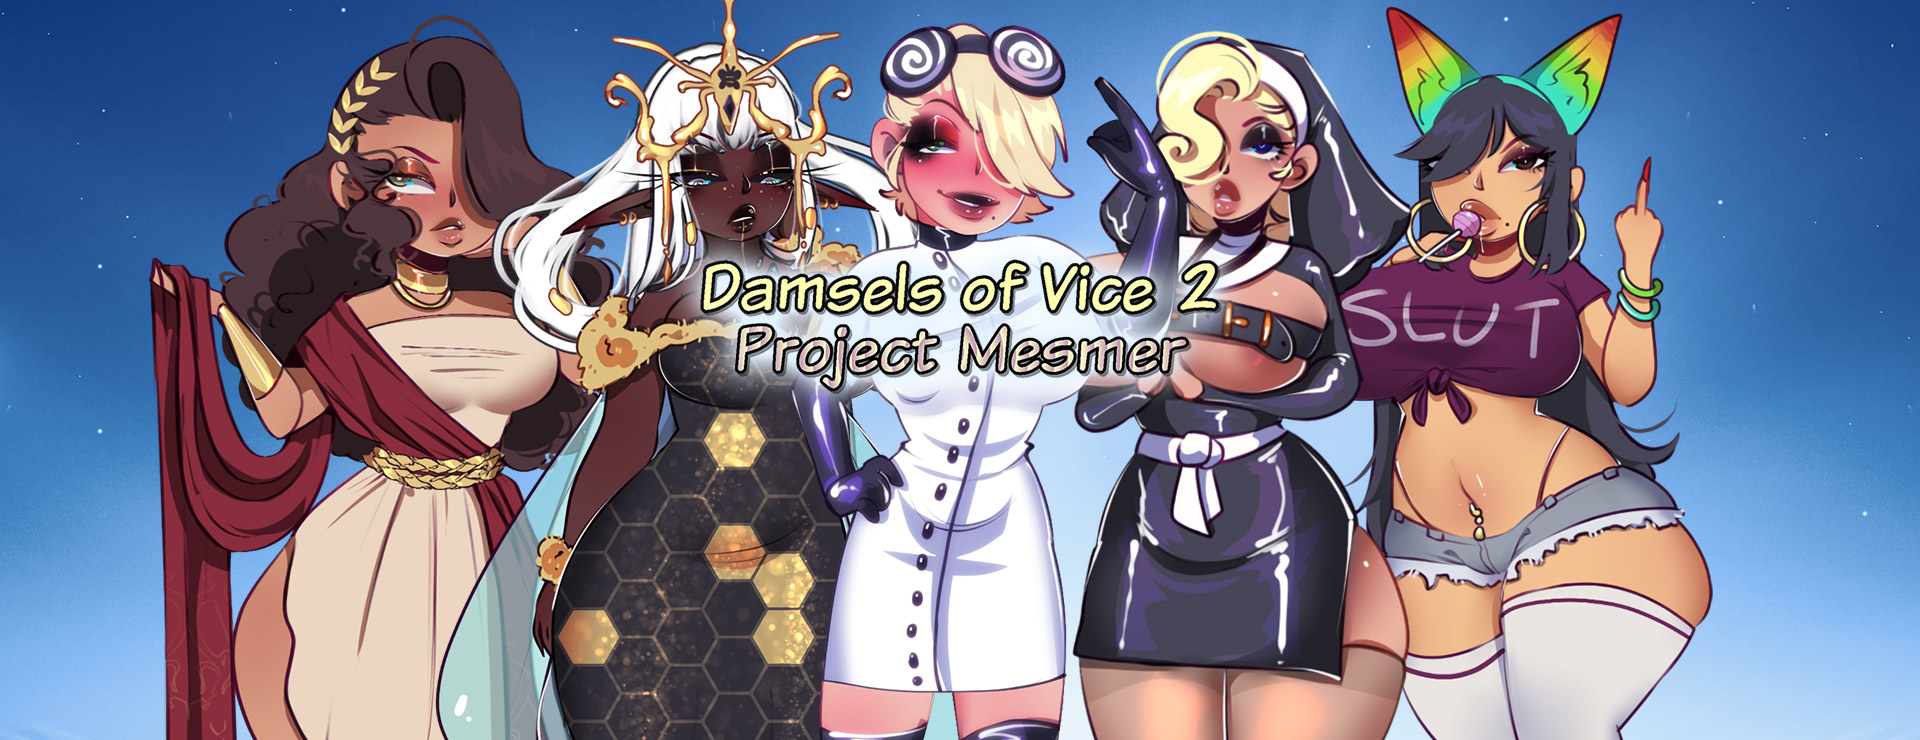 Damsels of Vice 2: Project Mesmer - RPG Spiel